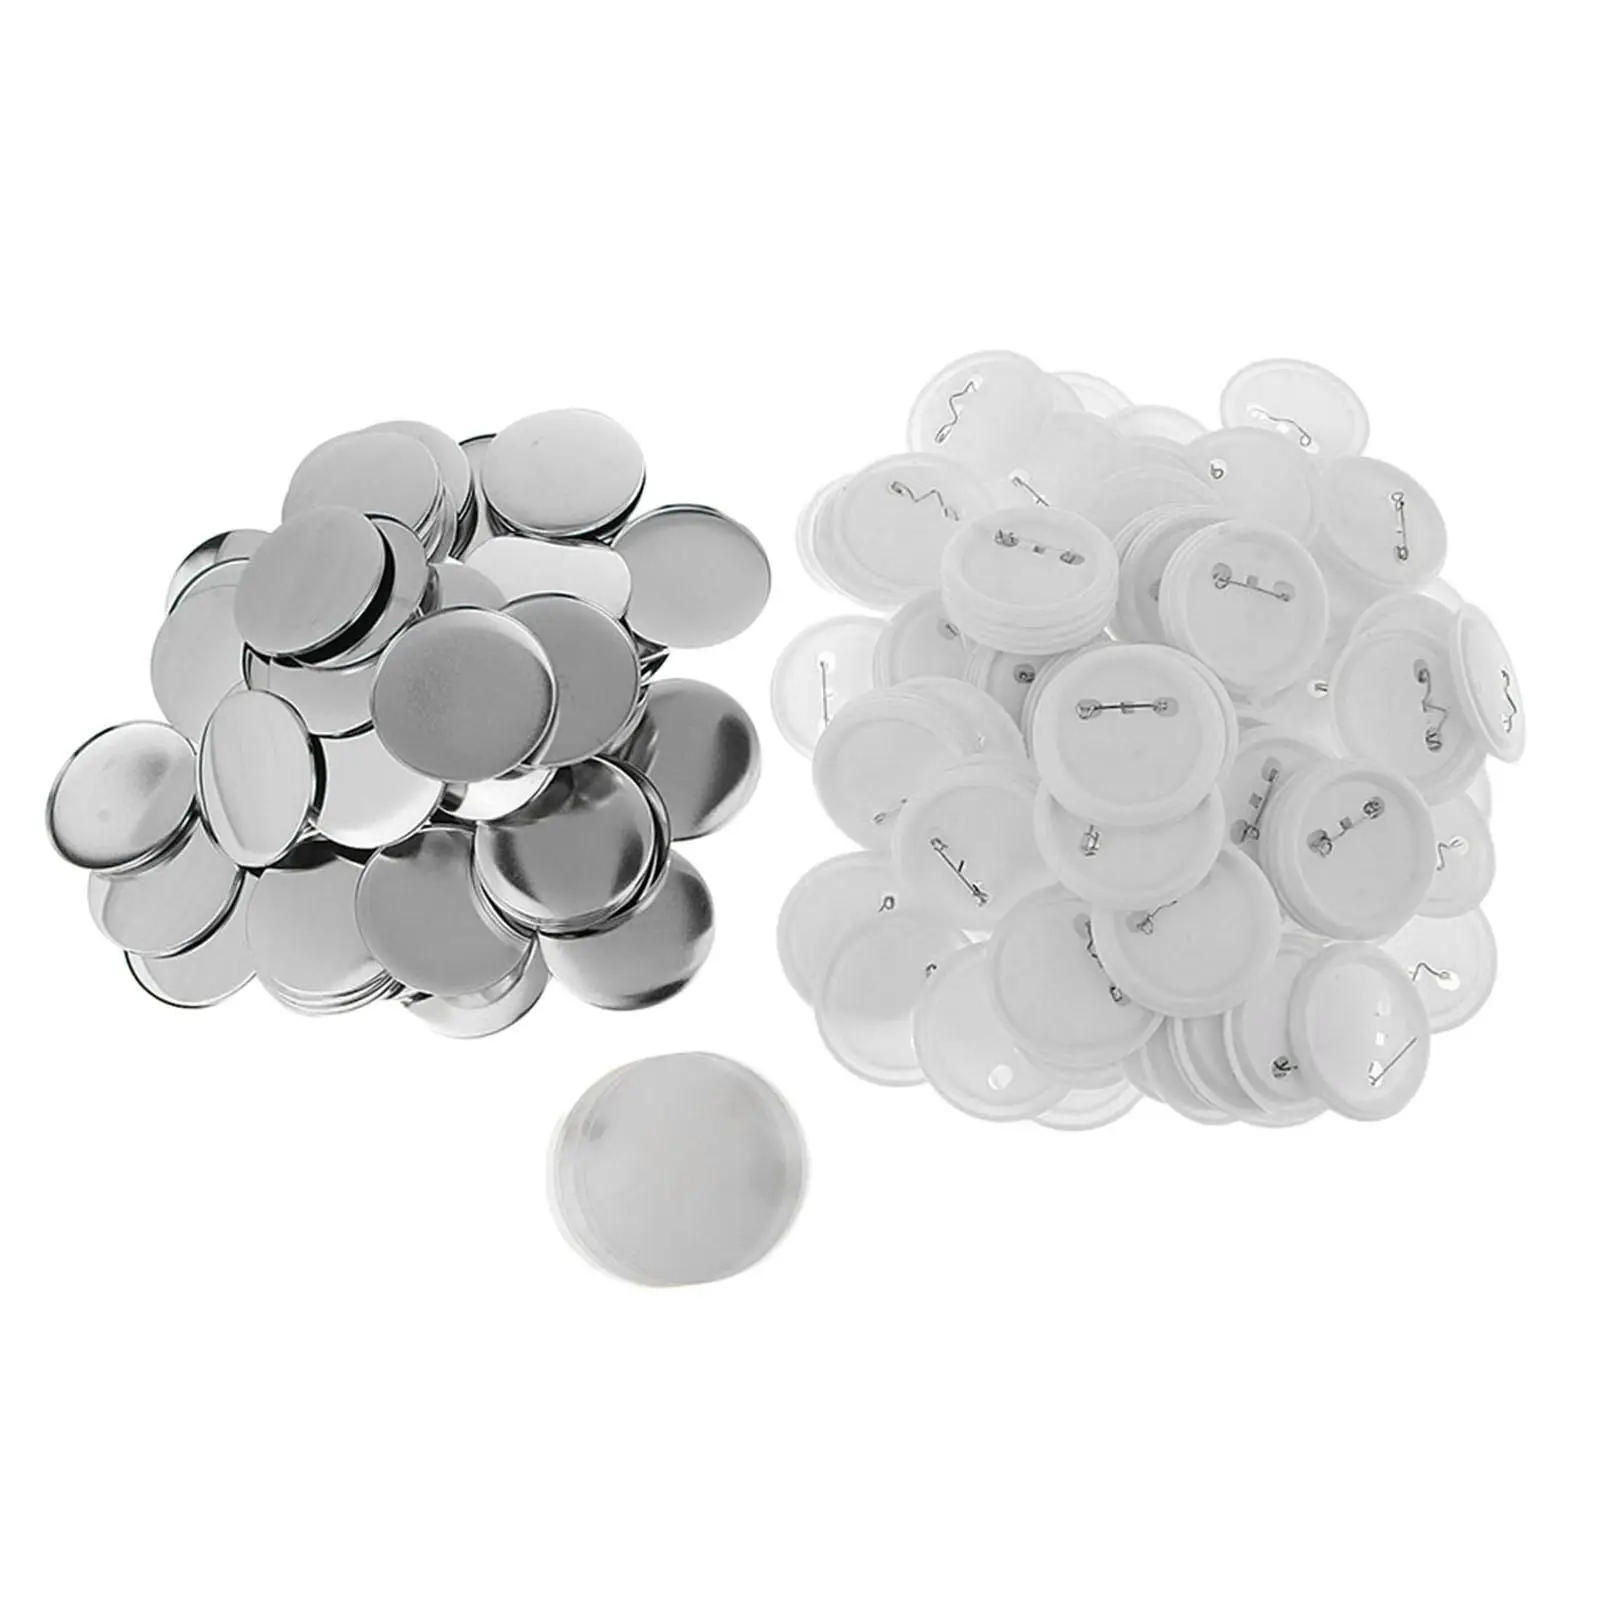 Blank Button Making Supplies Round Badges Buttons Parts for Button Maker Machine Presents Souvenirs with Metal Cover, Base, Film images - 6